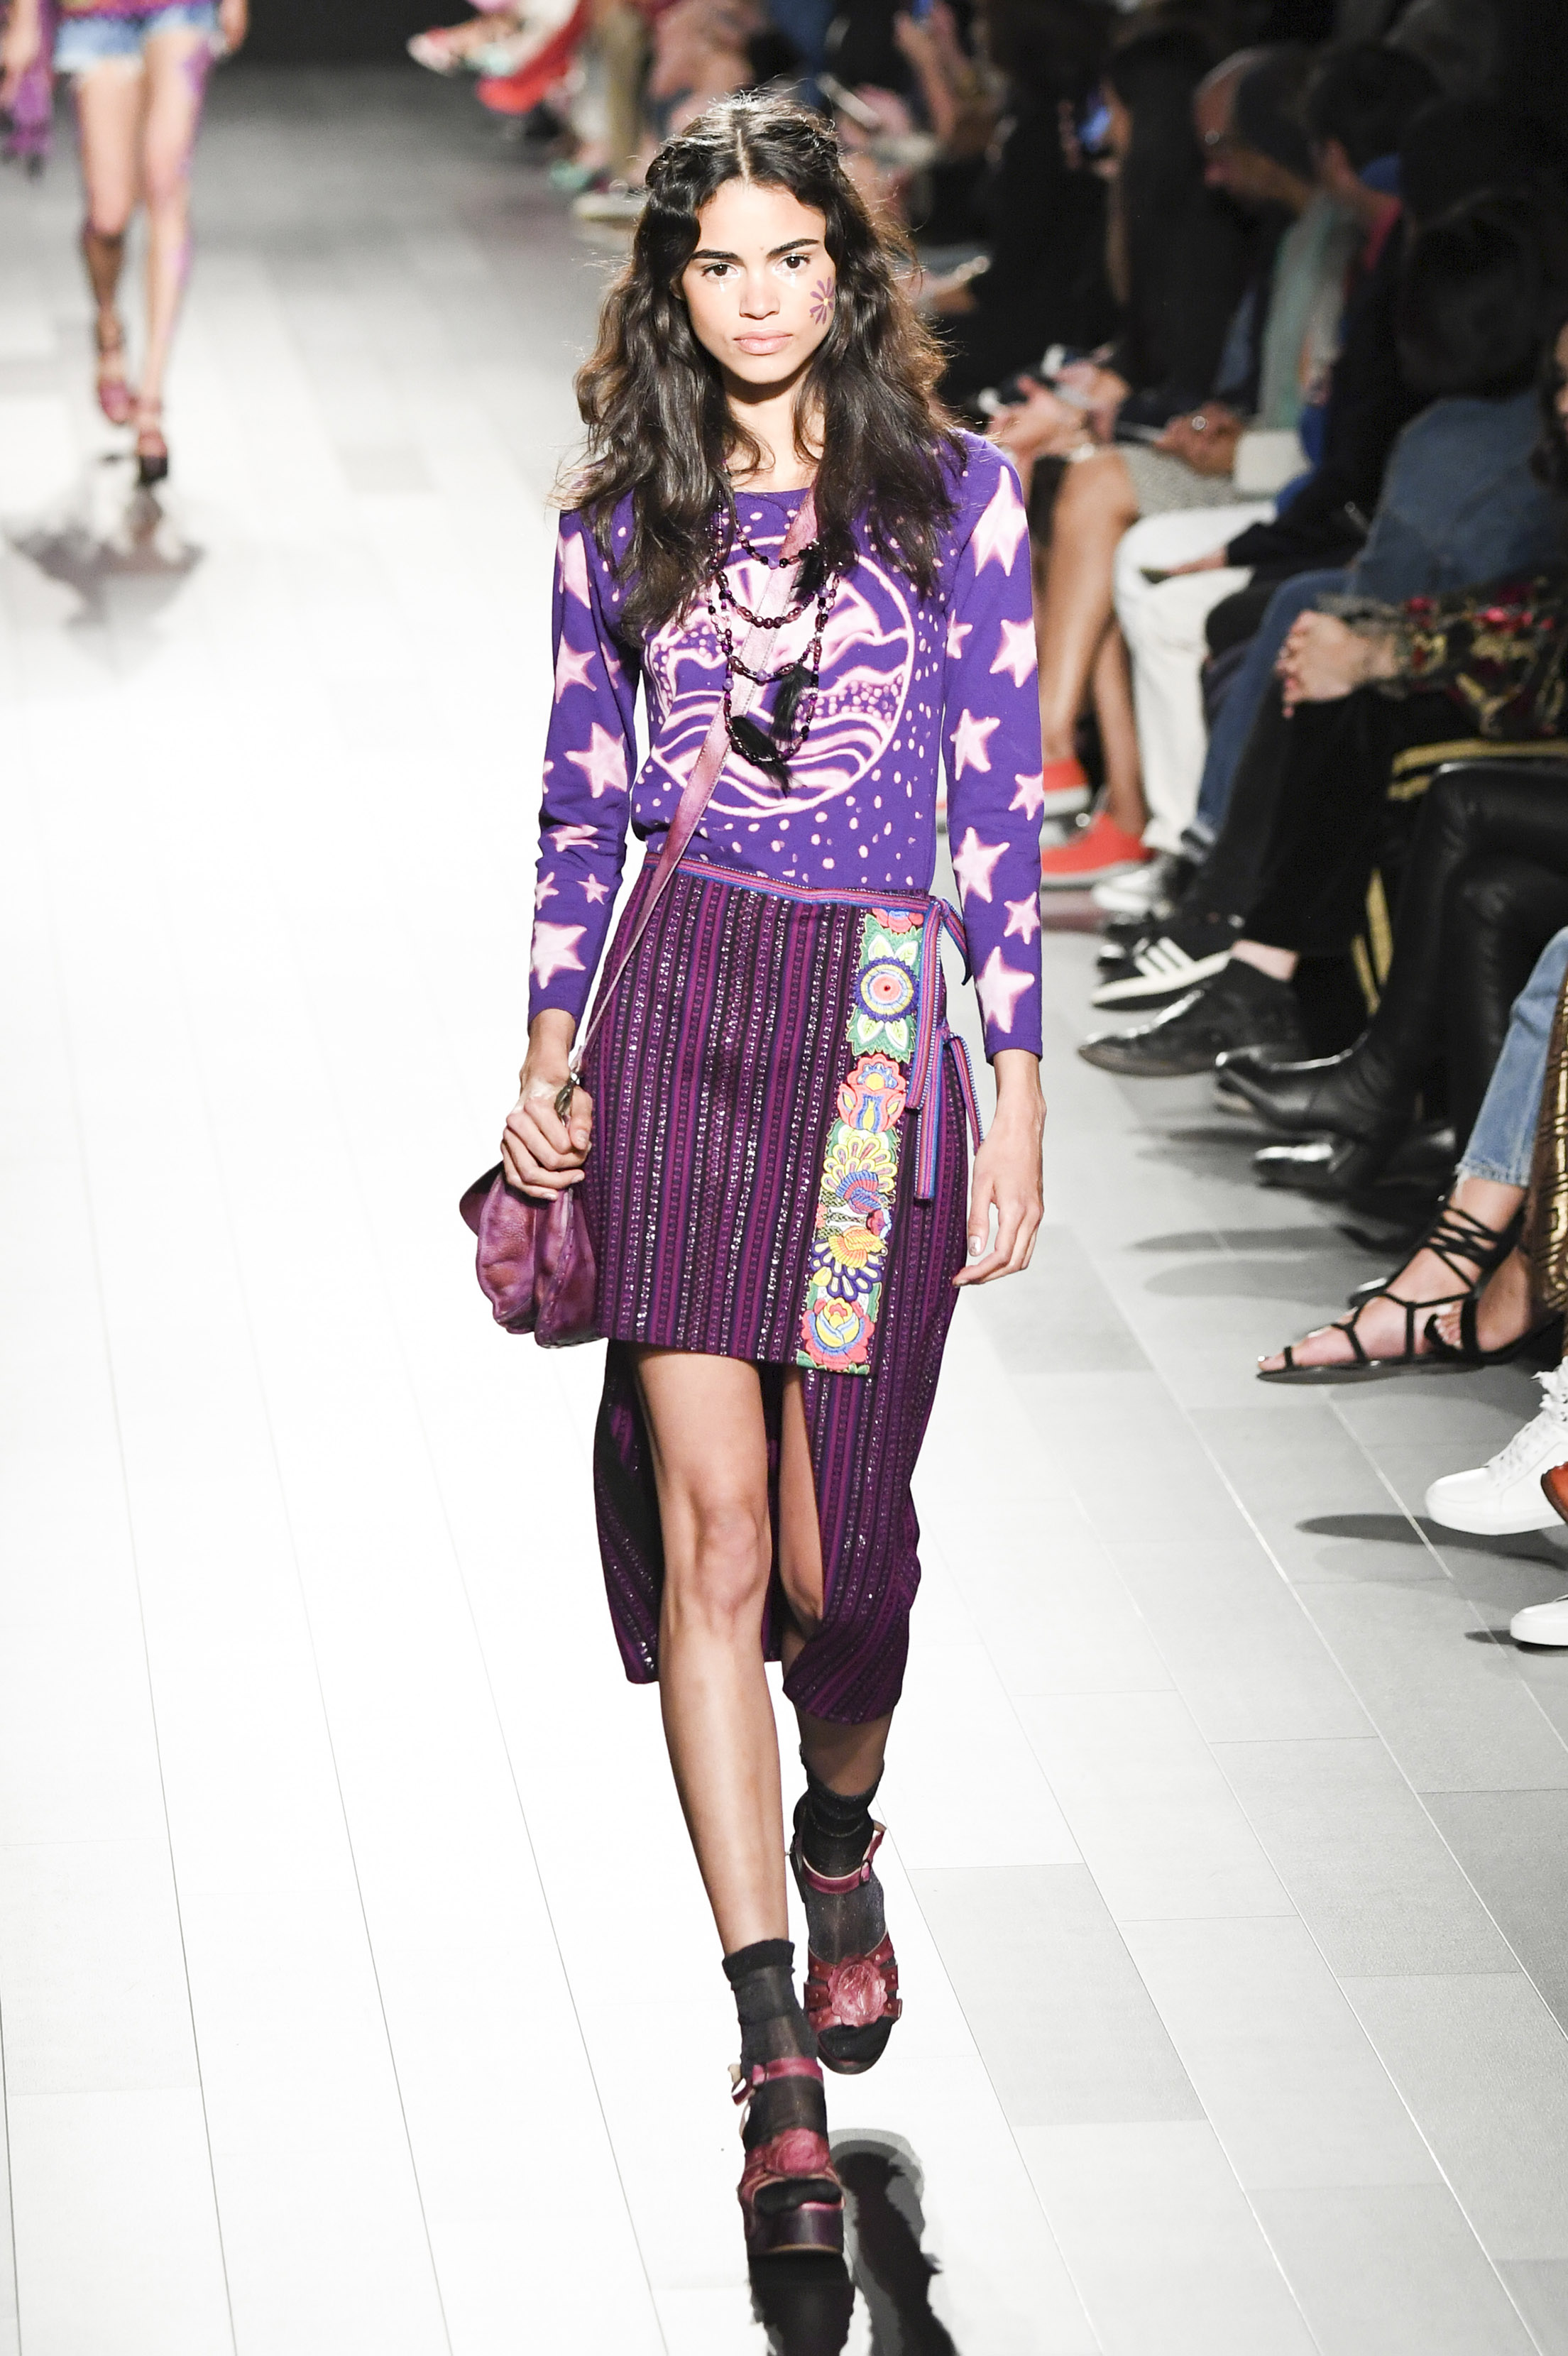 Anna Sui credit Jeroen Snijders